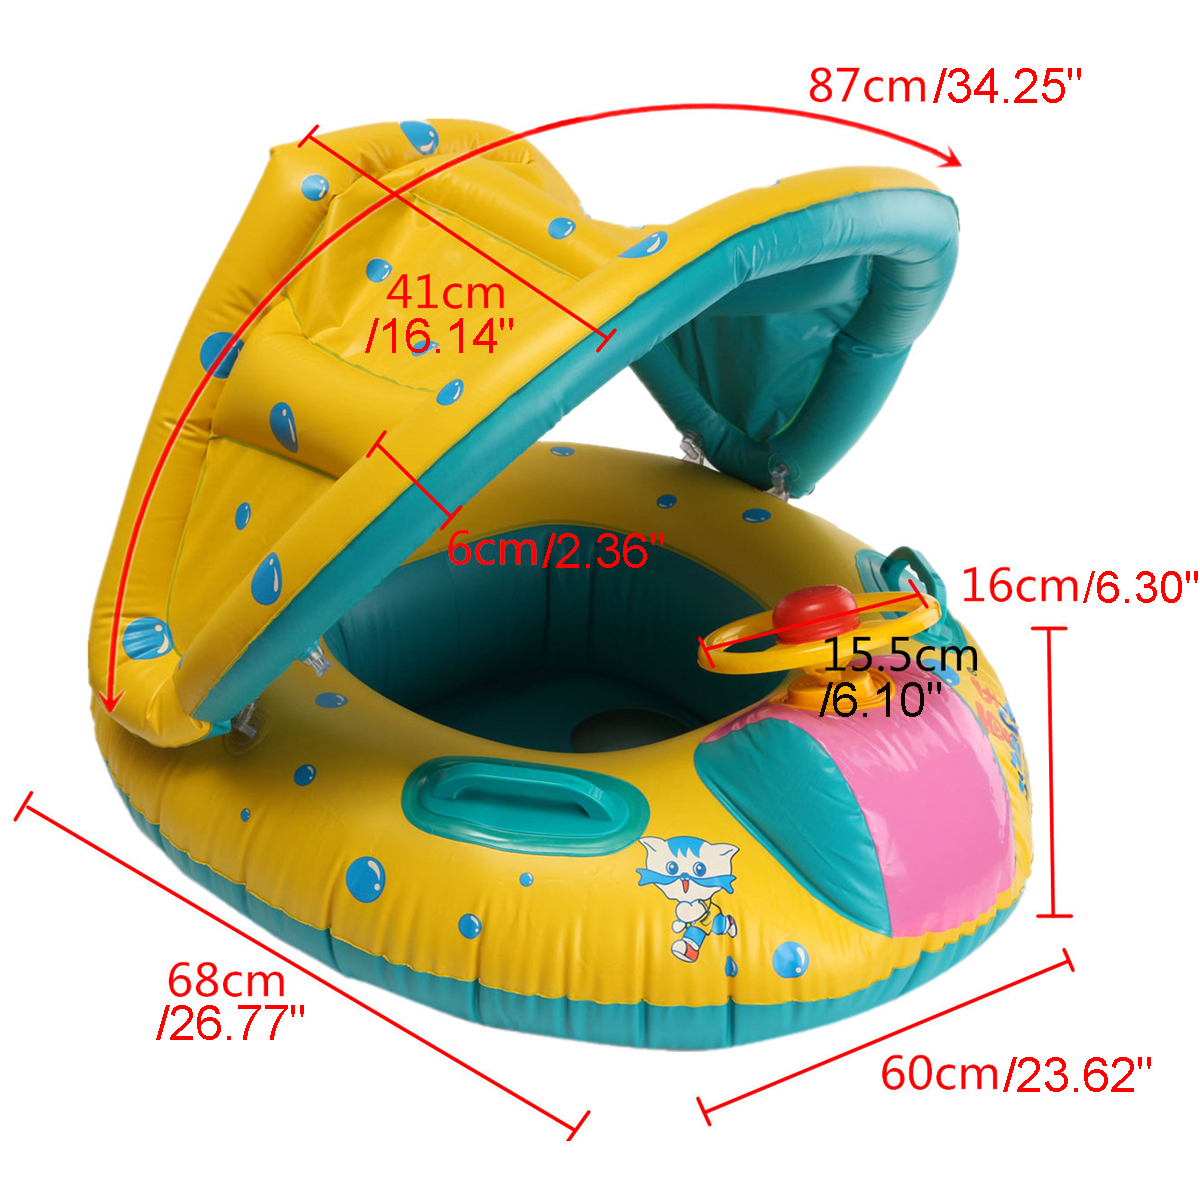 Baby-Inflatable-Swimming-Float-Ring-PVC-Lying-Water-Seat-Boat-Sunshade-Pool-Mattress-with-Canopy-Kid-1869041-2